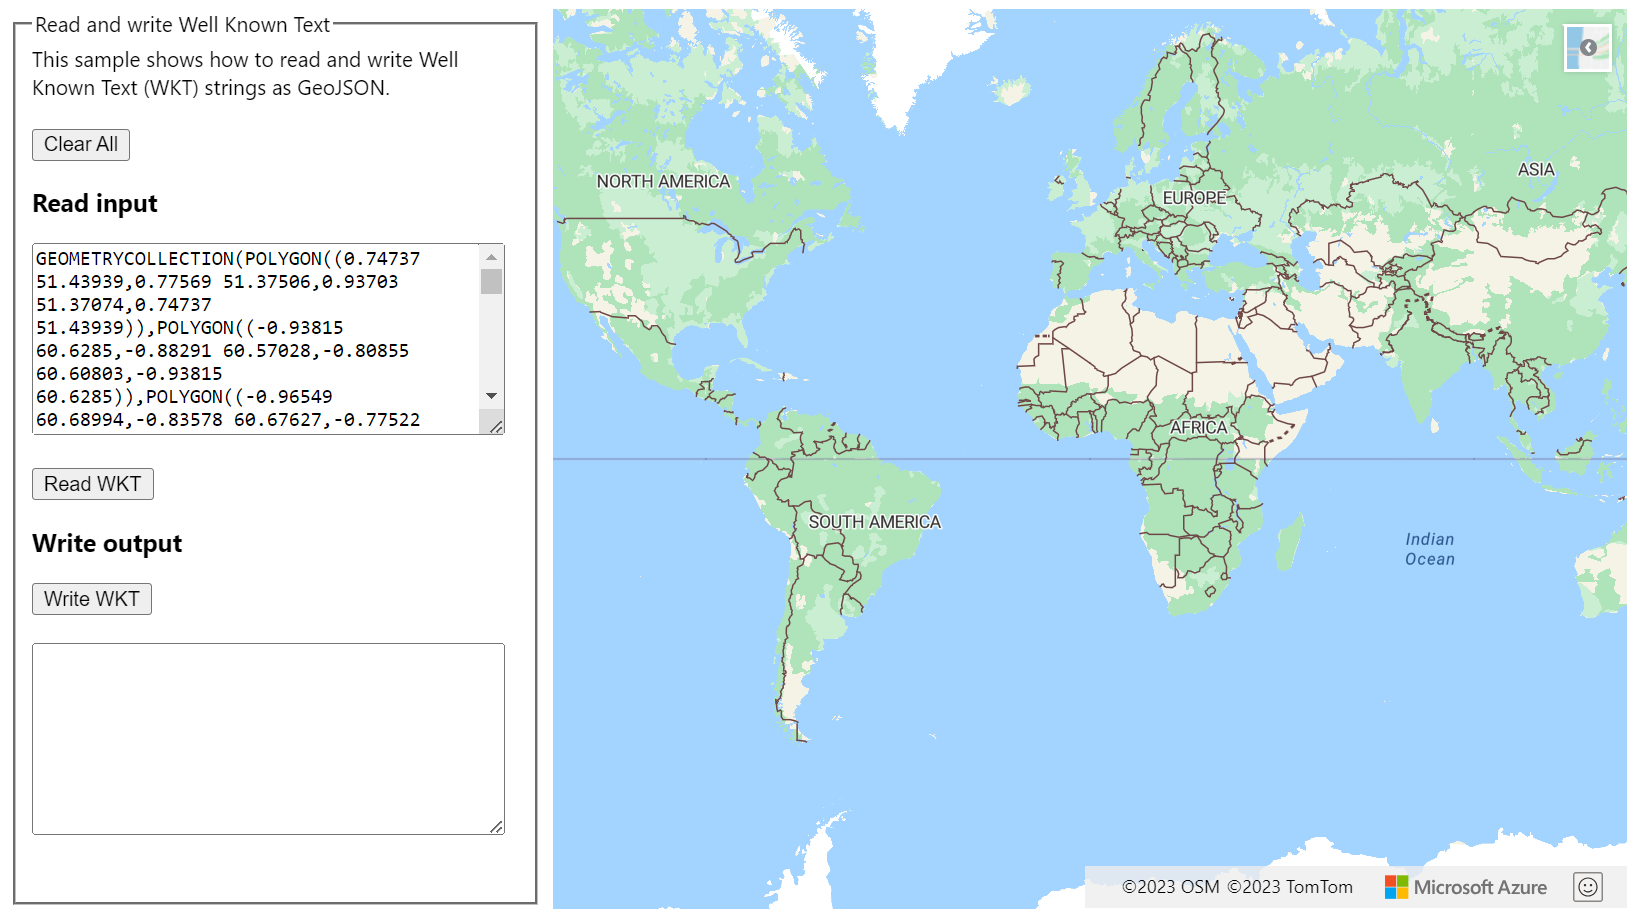 A screenshot showing the sample that demonstrates how to read and write Well Known Text (WKT) strings as GeoJSON.